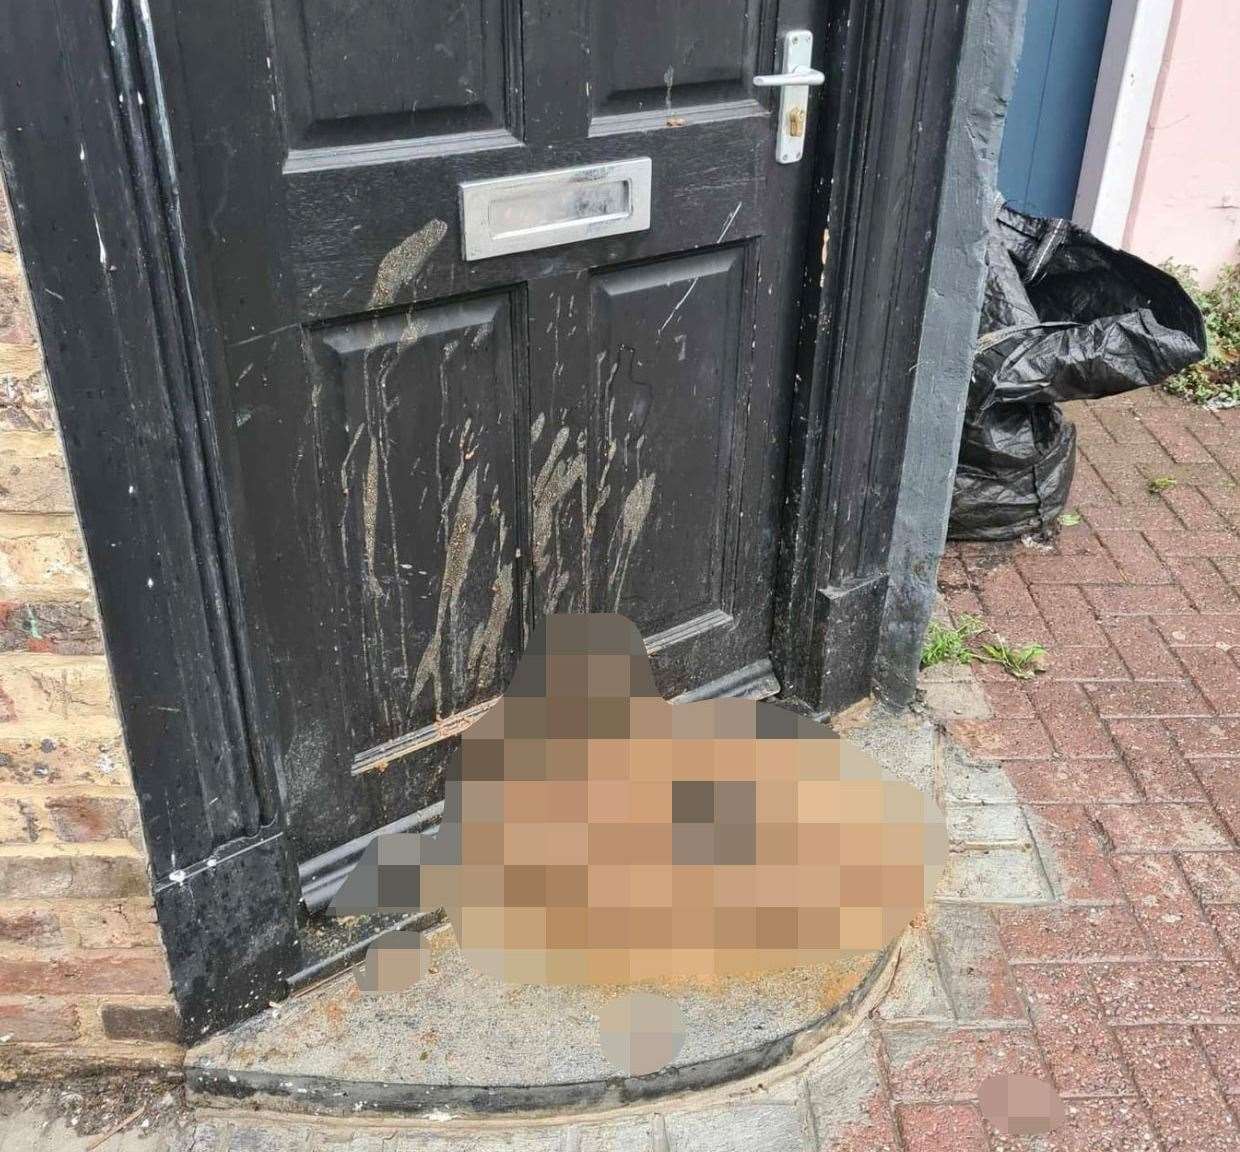 The disgusting mound of poo left on Maxi Mayhew's doorstep in Ramsgate. Picture: Jam Press